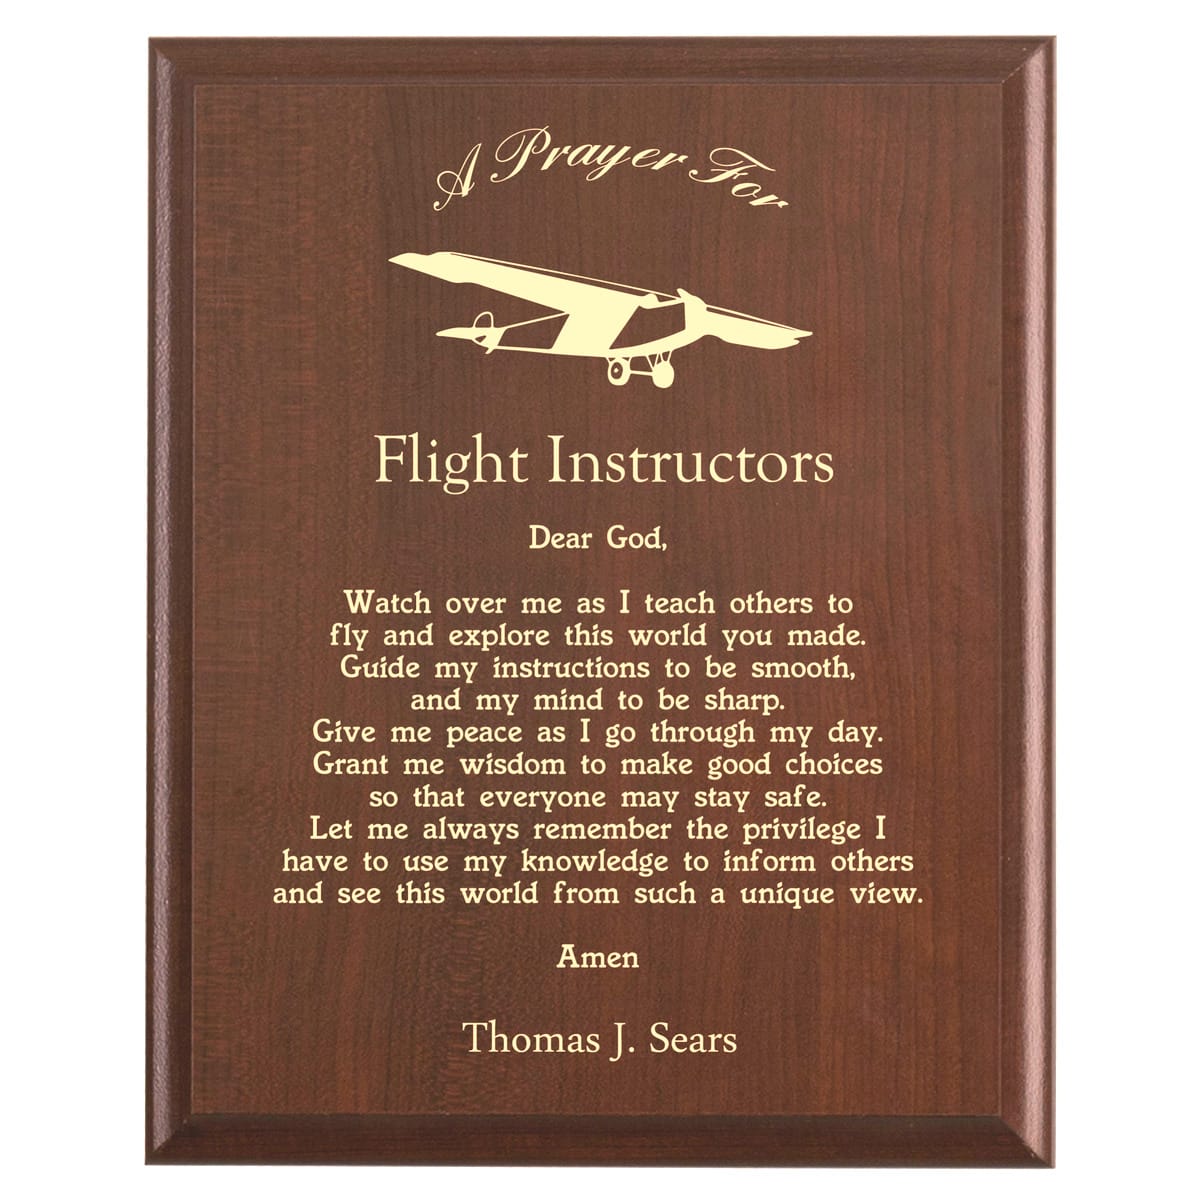 Plaque photo: Flight Instructor Prayer Plaque design with free personalization. Wood style finish with customized text.